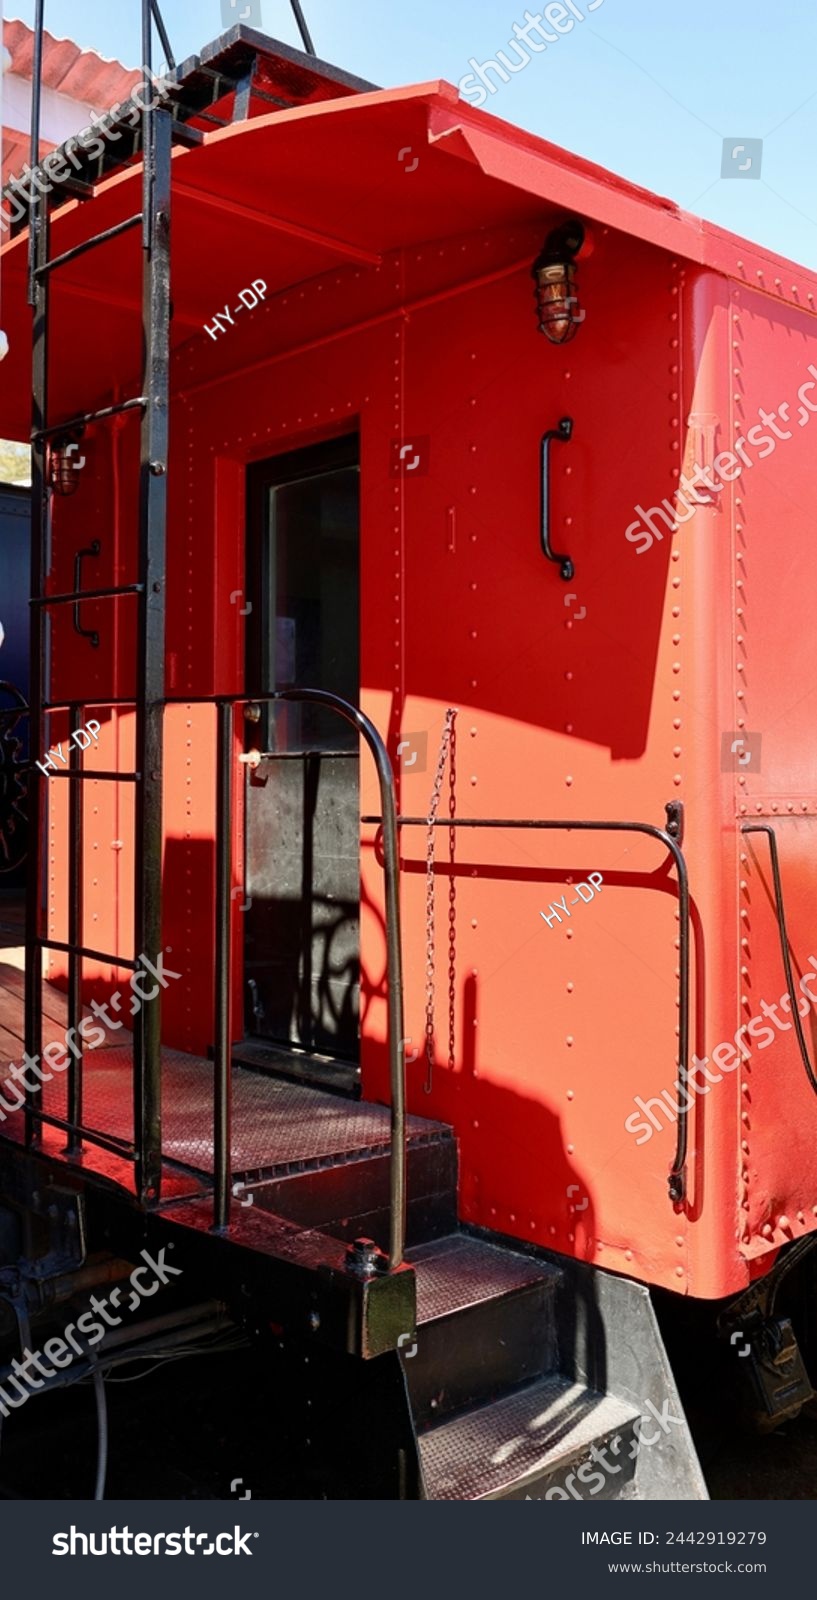 Bright red antique train caboose at the station #2442919279